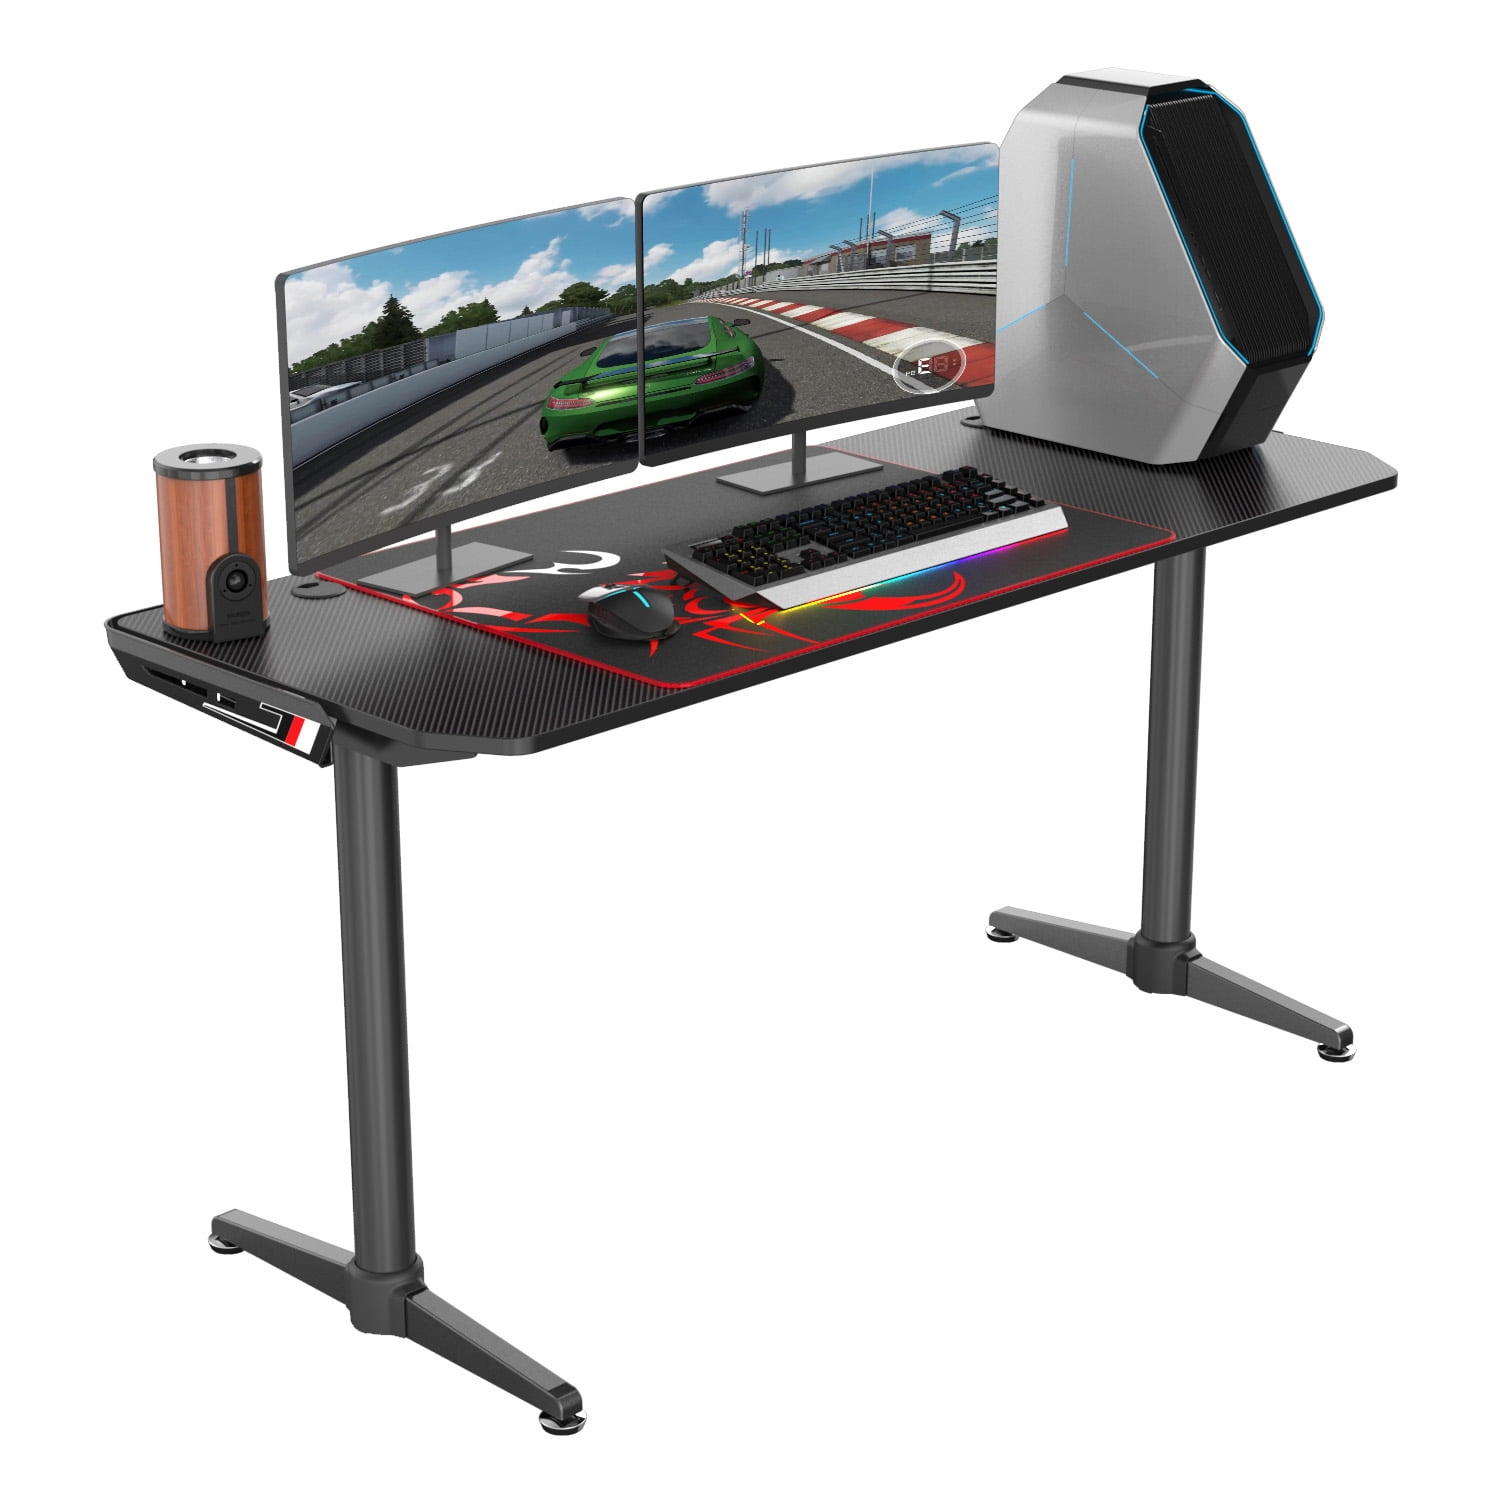 Eureka 60'' L shaped Computer Desk with Mouse Pad and Cable Management